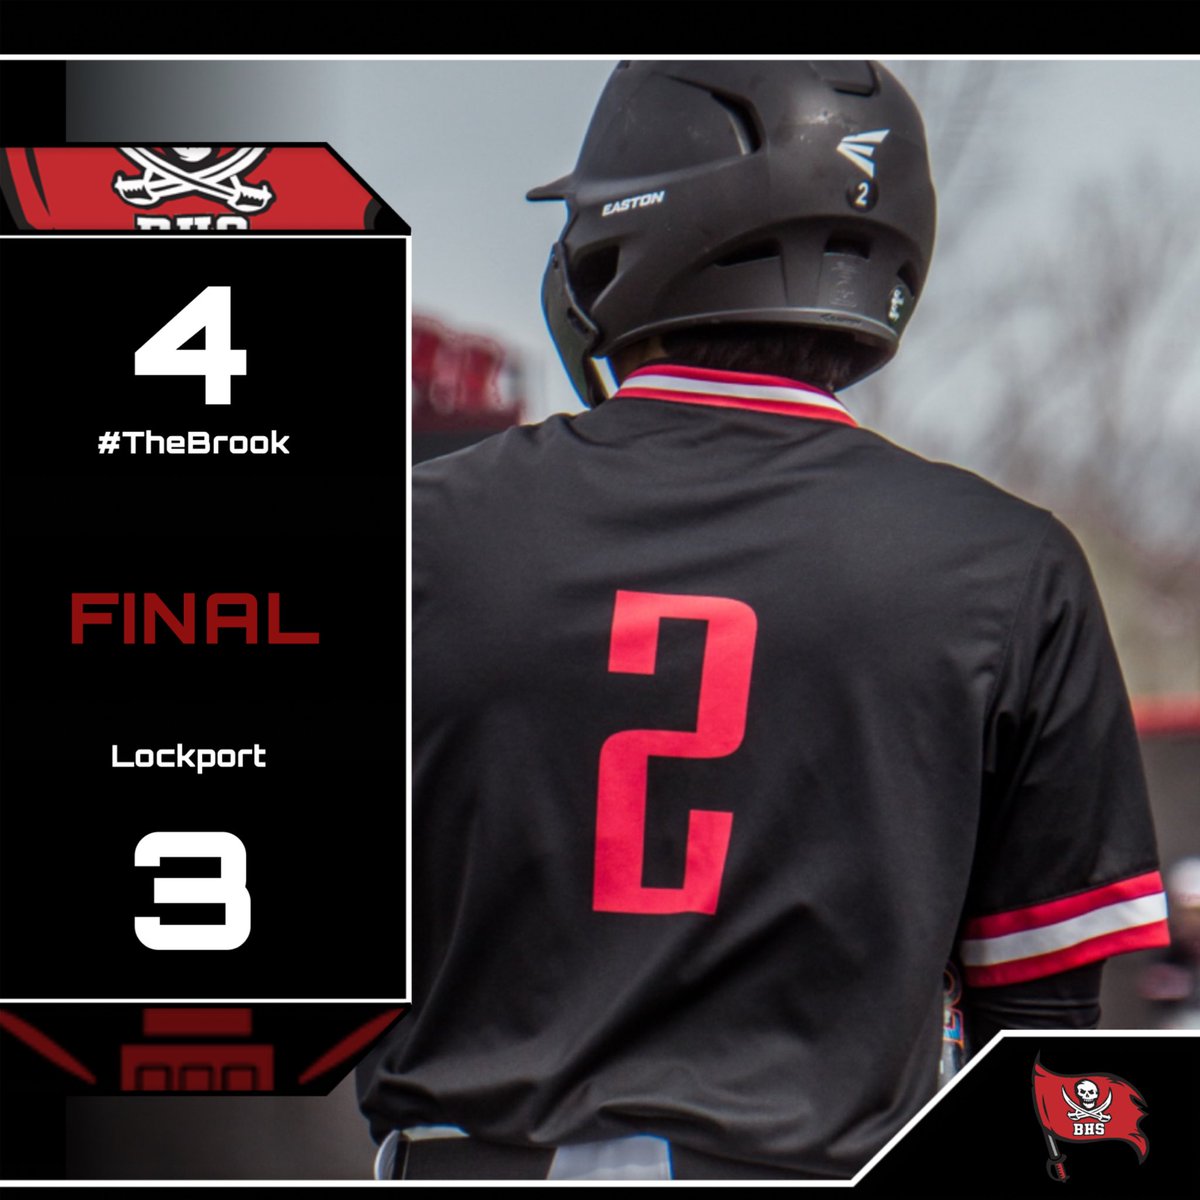 Final from Lockport in 12 innings is 4-3. Josh Lamberson and Danny Basalone were great on the mound allowing only 6 baserunners in 11 innings combined. Tommy Corley (Solo HR), Ryan Witt (2-4), and Fernando Sosa (2-4, RBI) paced the offense. #BrookBoys #LETSGO